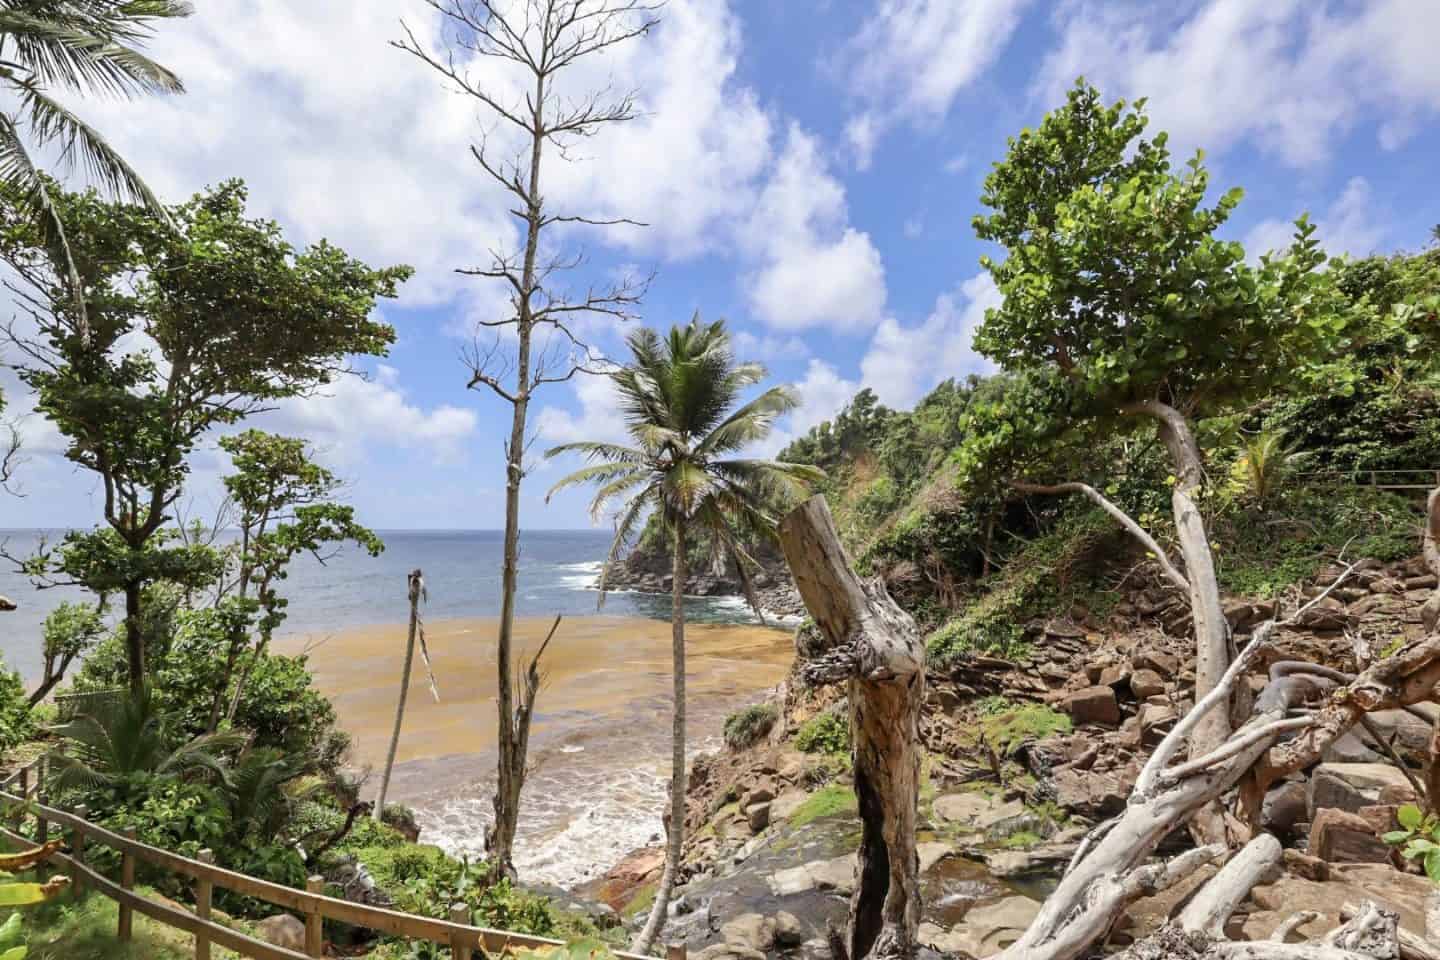 dominica day tours, kalinago territory beach and trees dominica